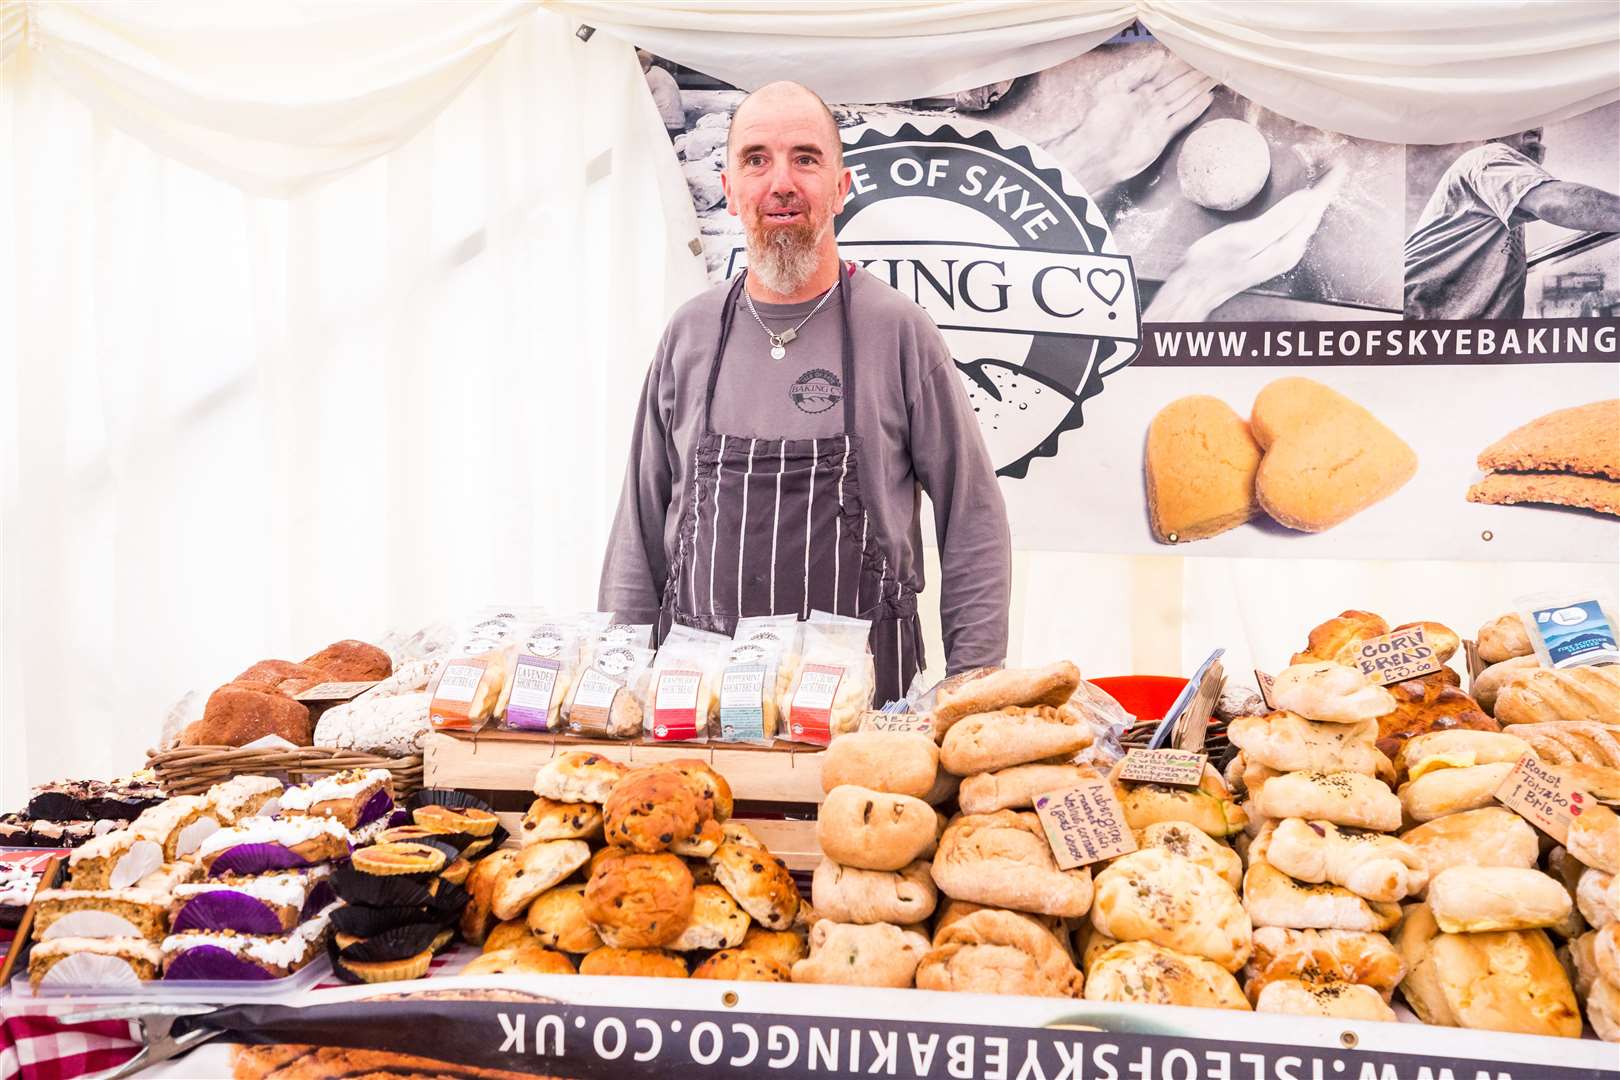 The Isle of Skye Baking Company's stand at the 2019 Taste North food and drink festival.